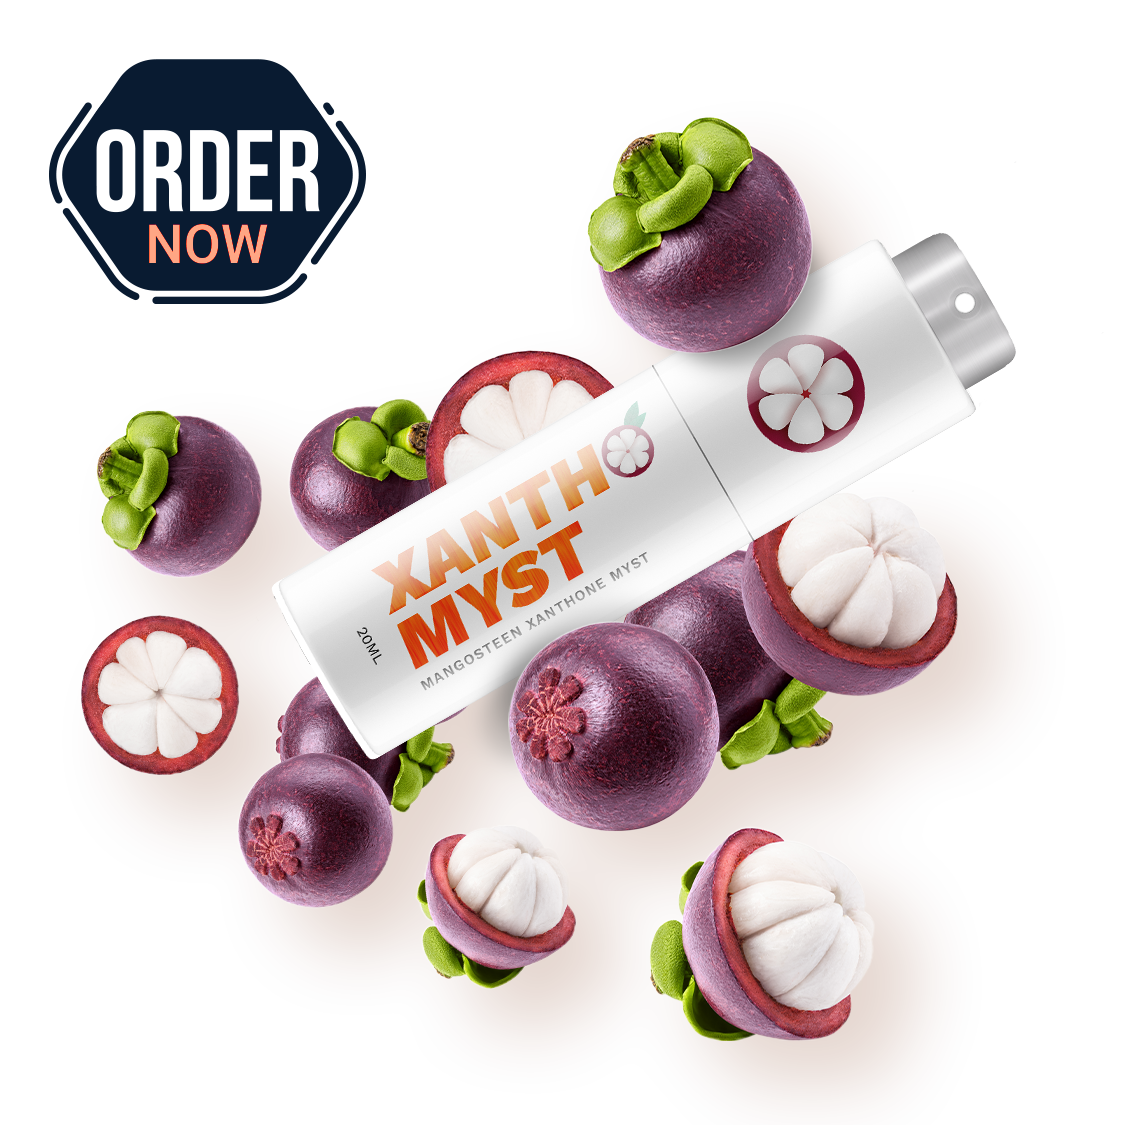 Mangosteen based product called Xanthomyst Paterson NJ